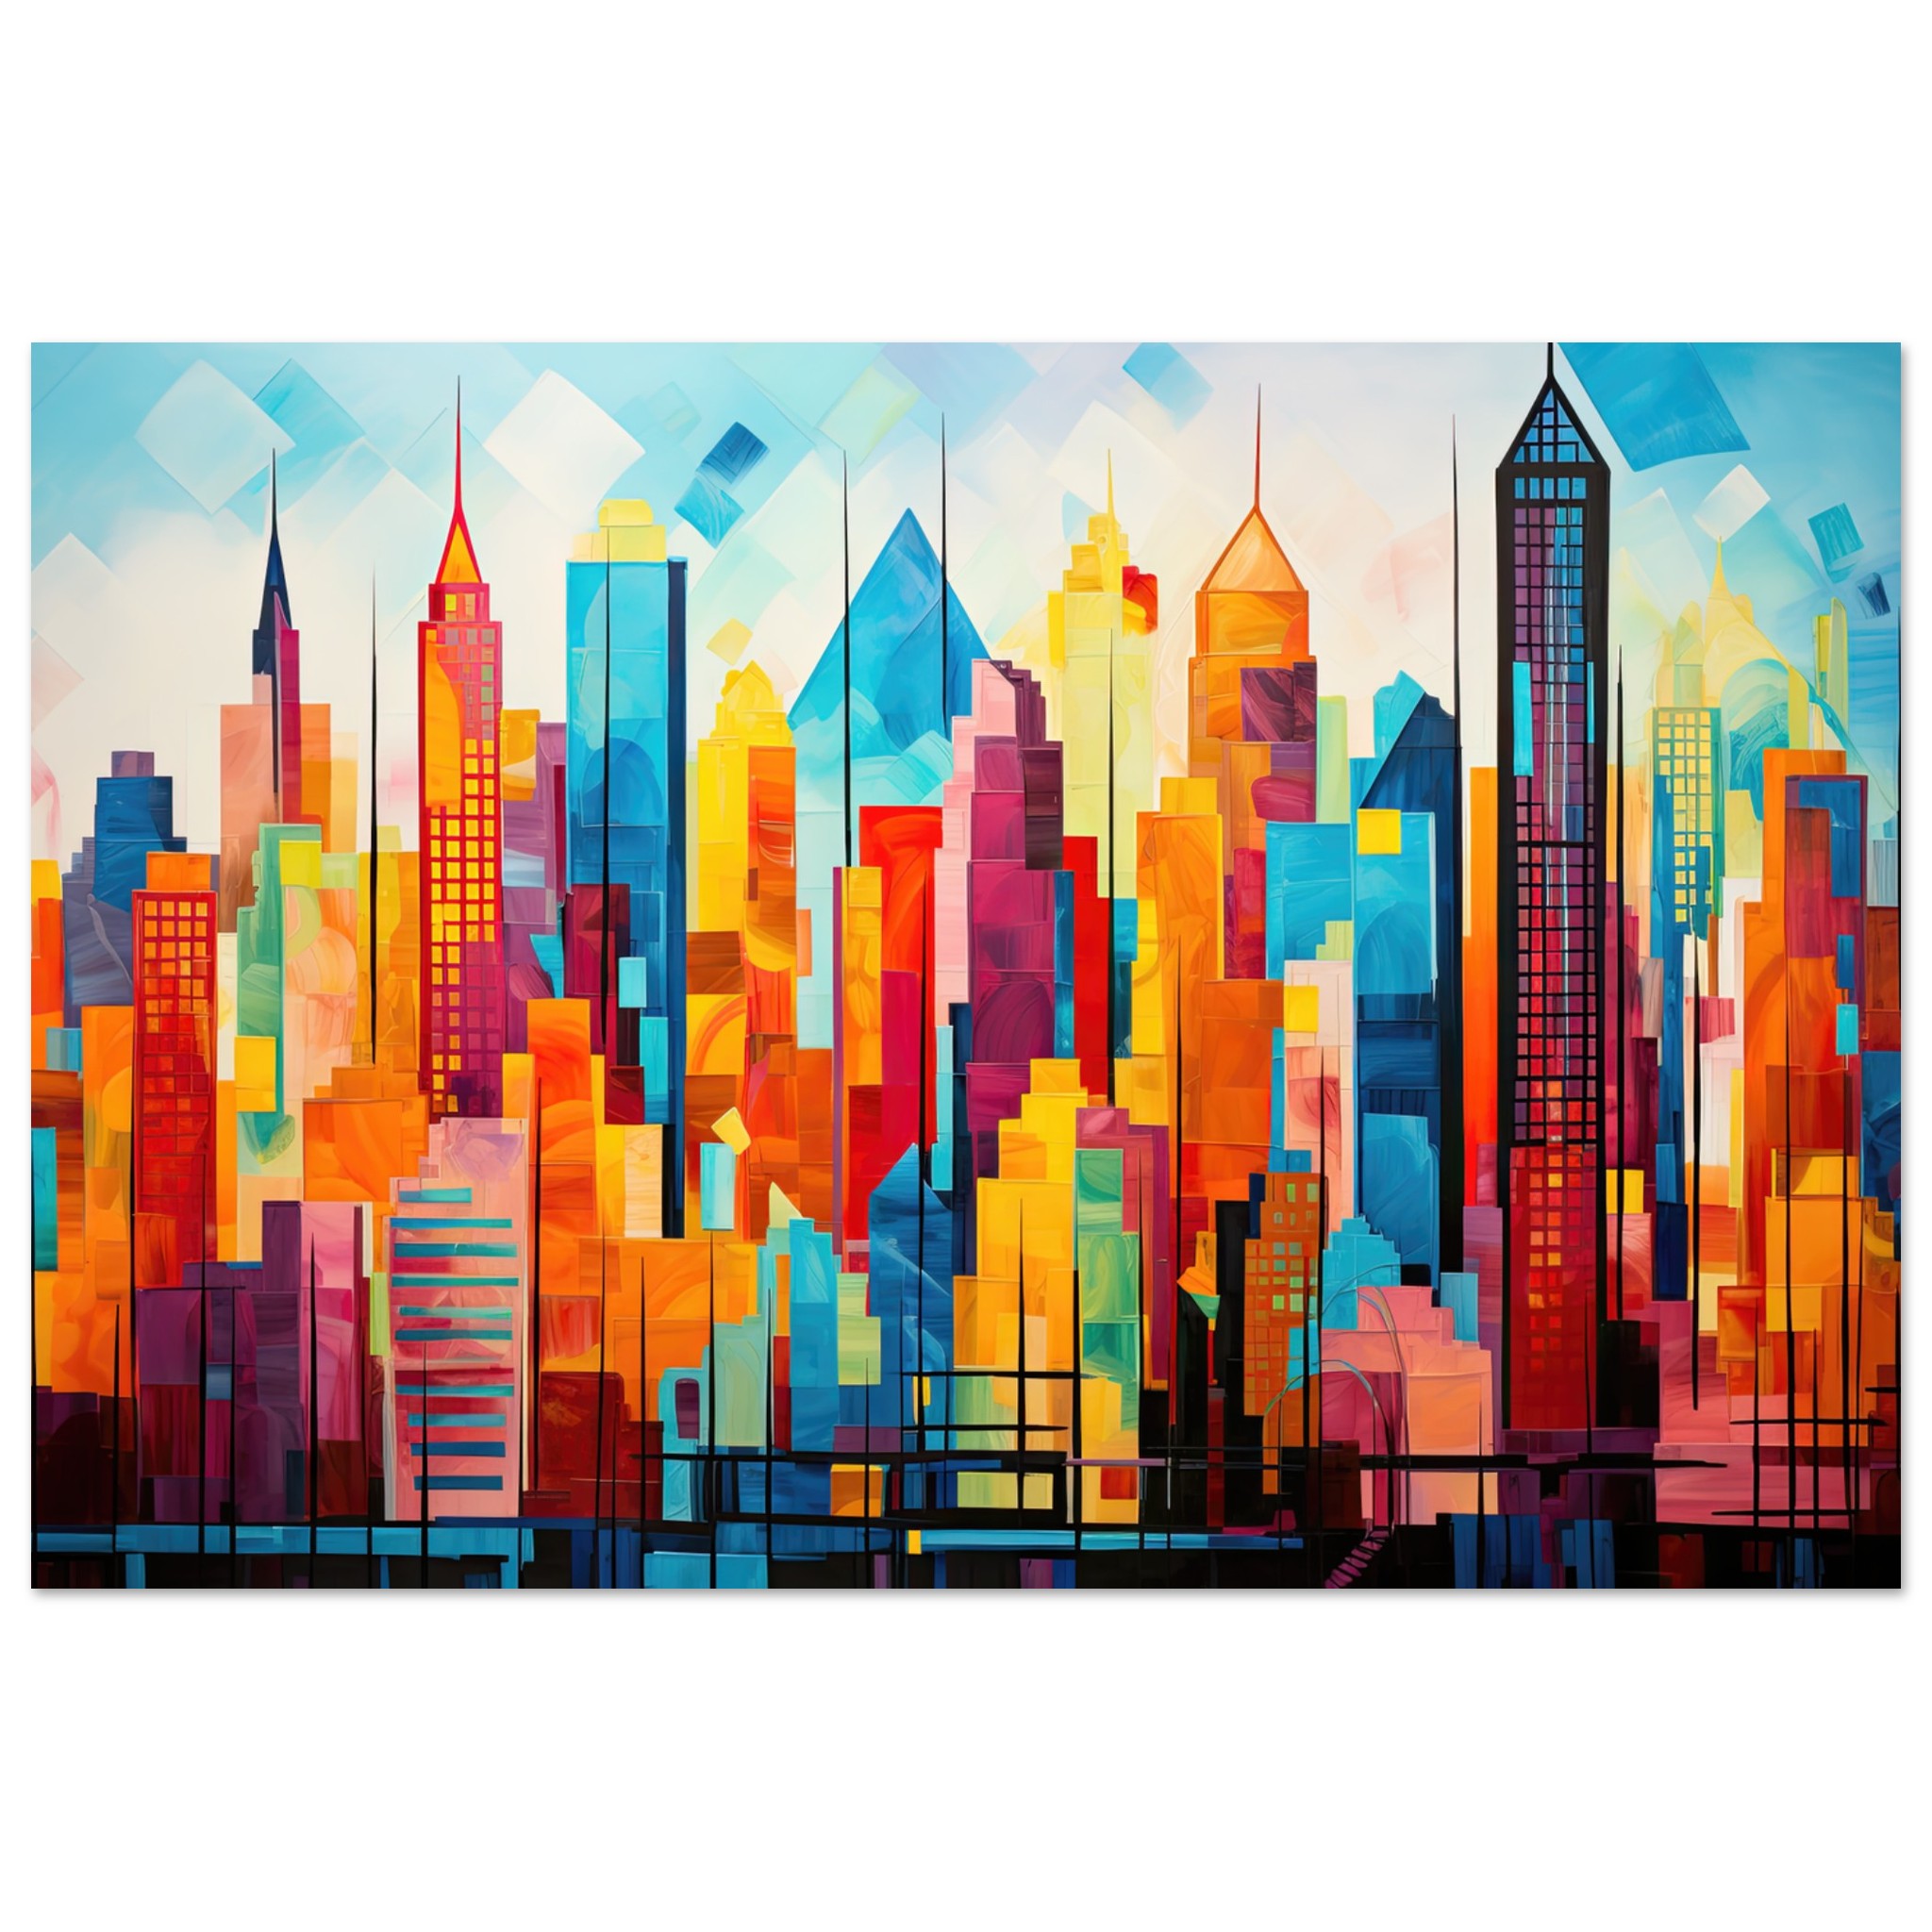 Colorful Abstract Cityscape Painted – Poster – 30×45 cm / 12×18″